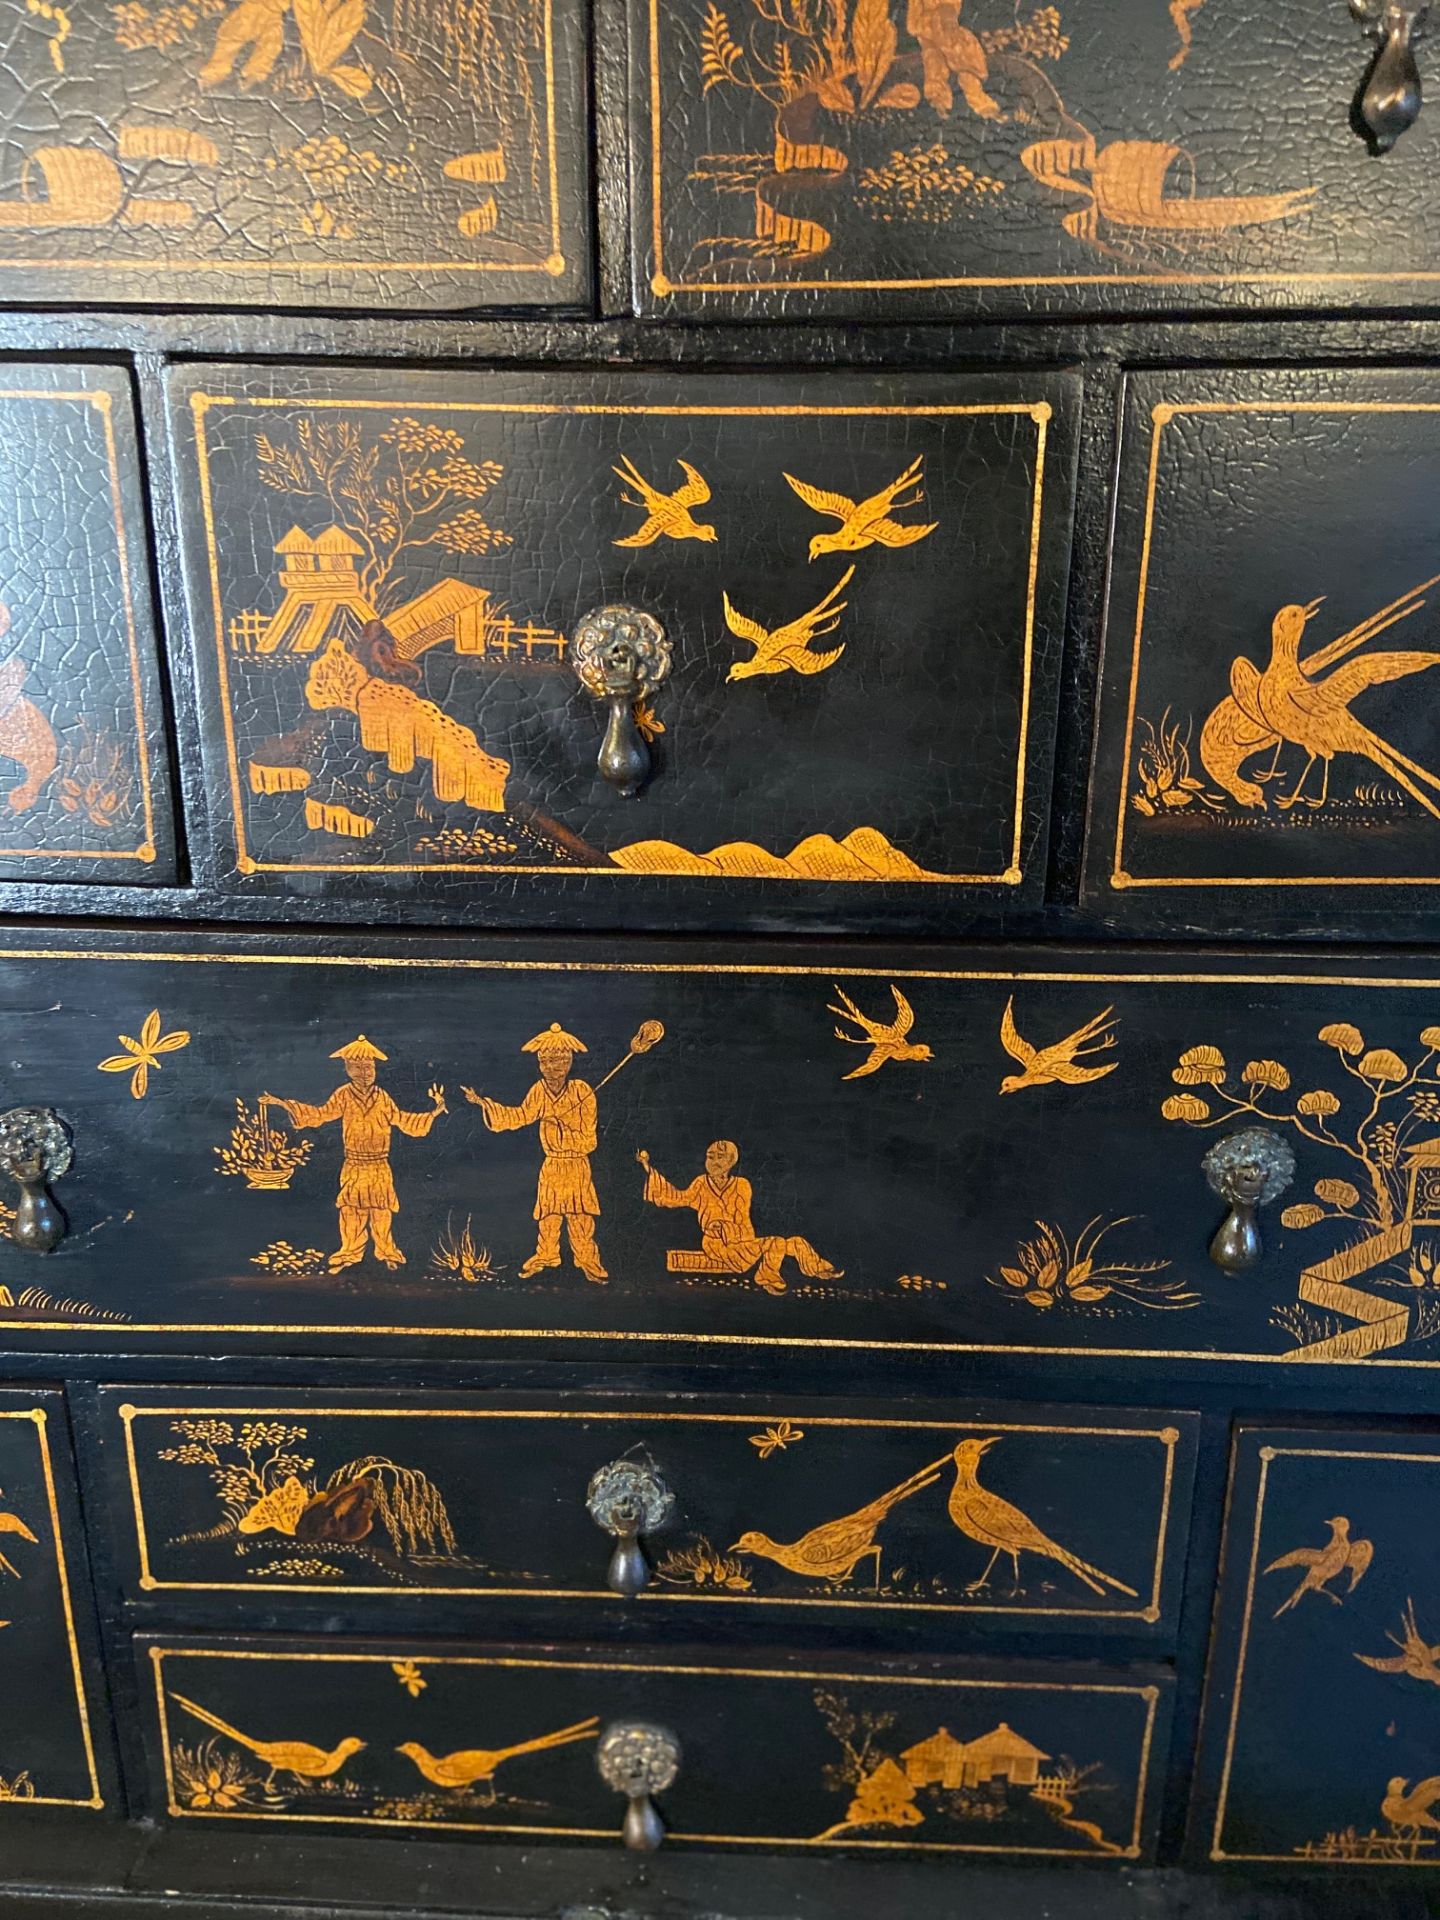 An early 18th century Chinese export black lacquer cabinet on a European stand - Image 29 of 36